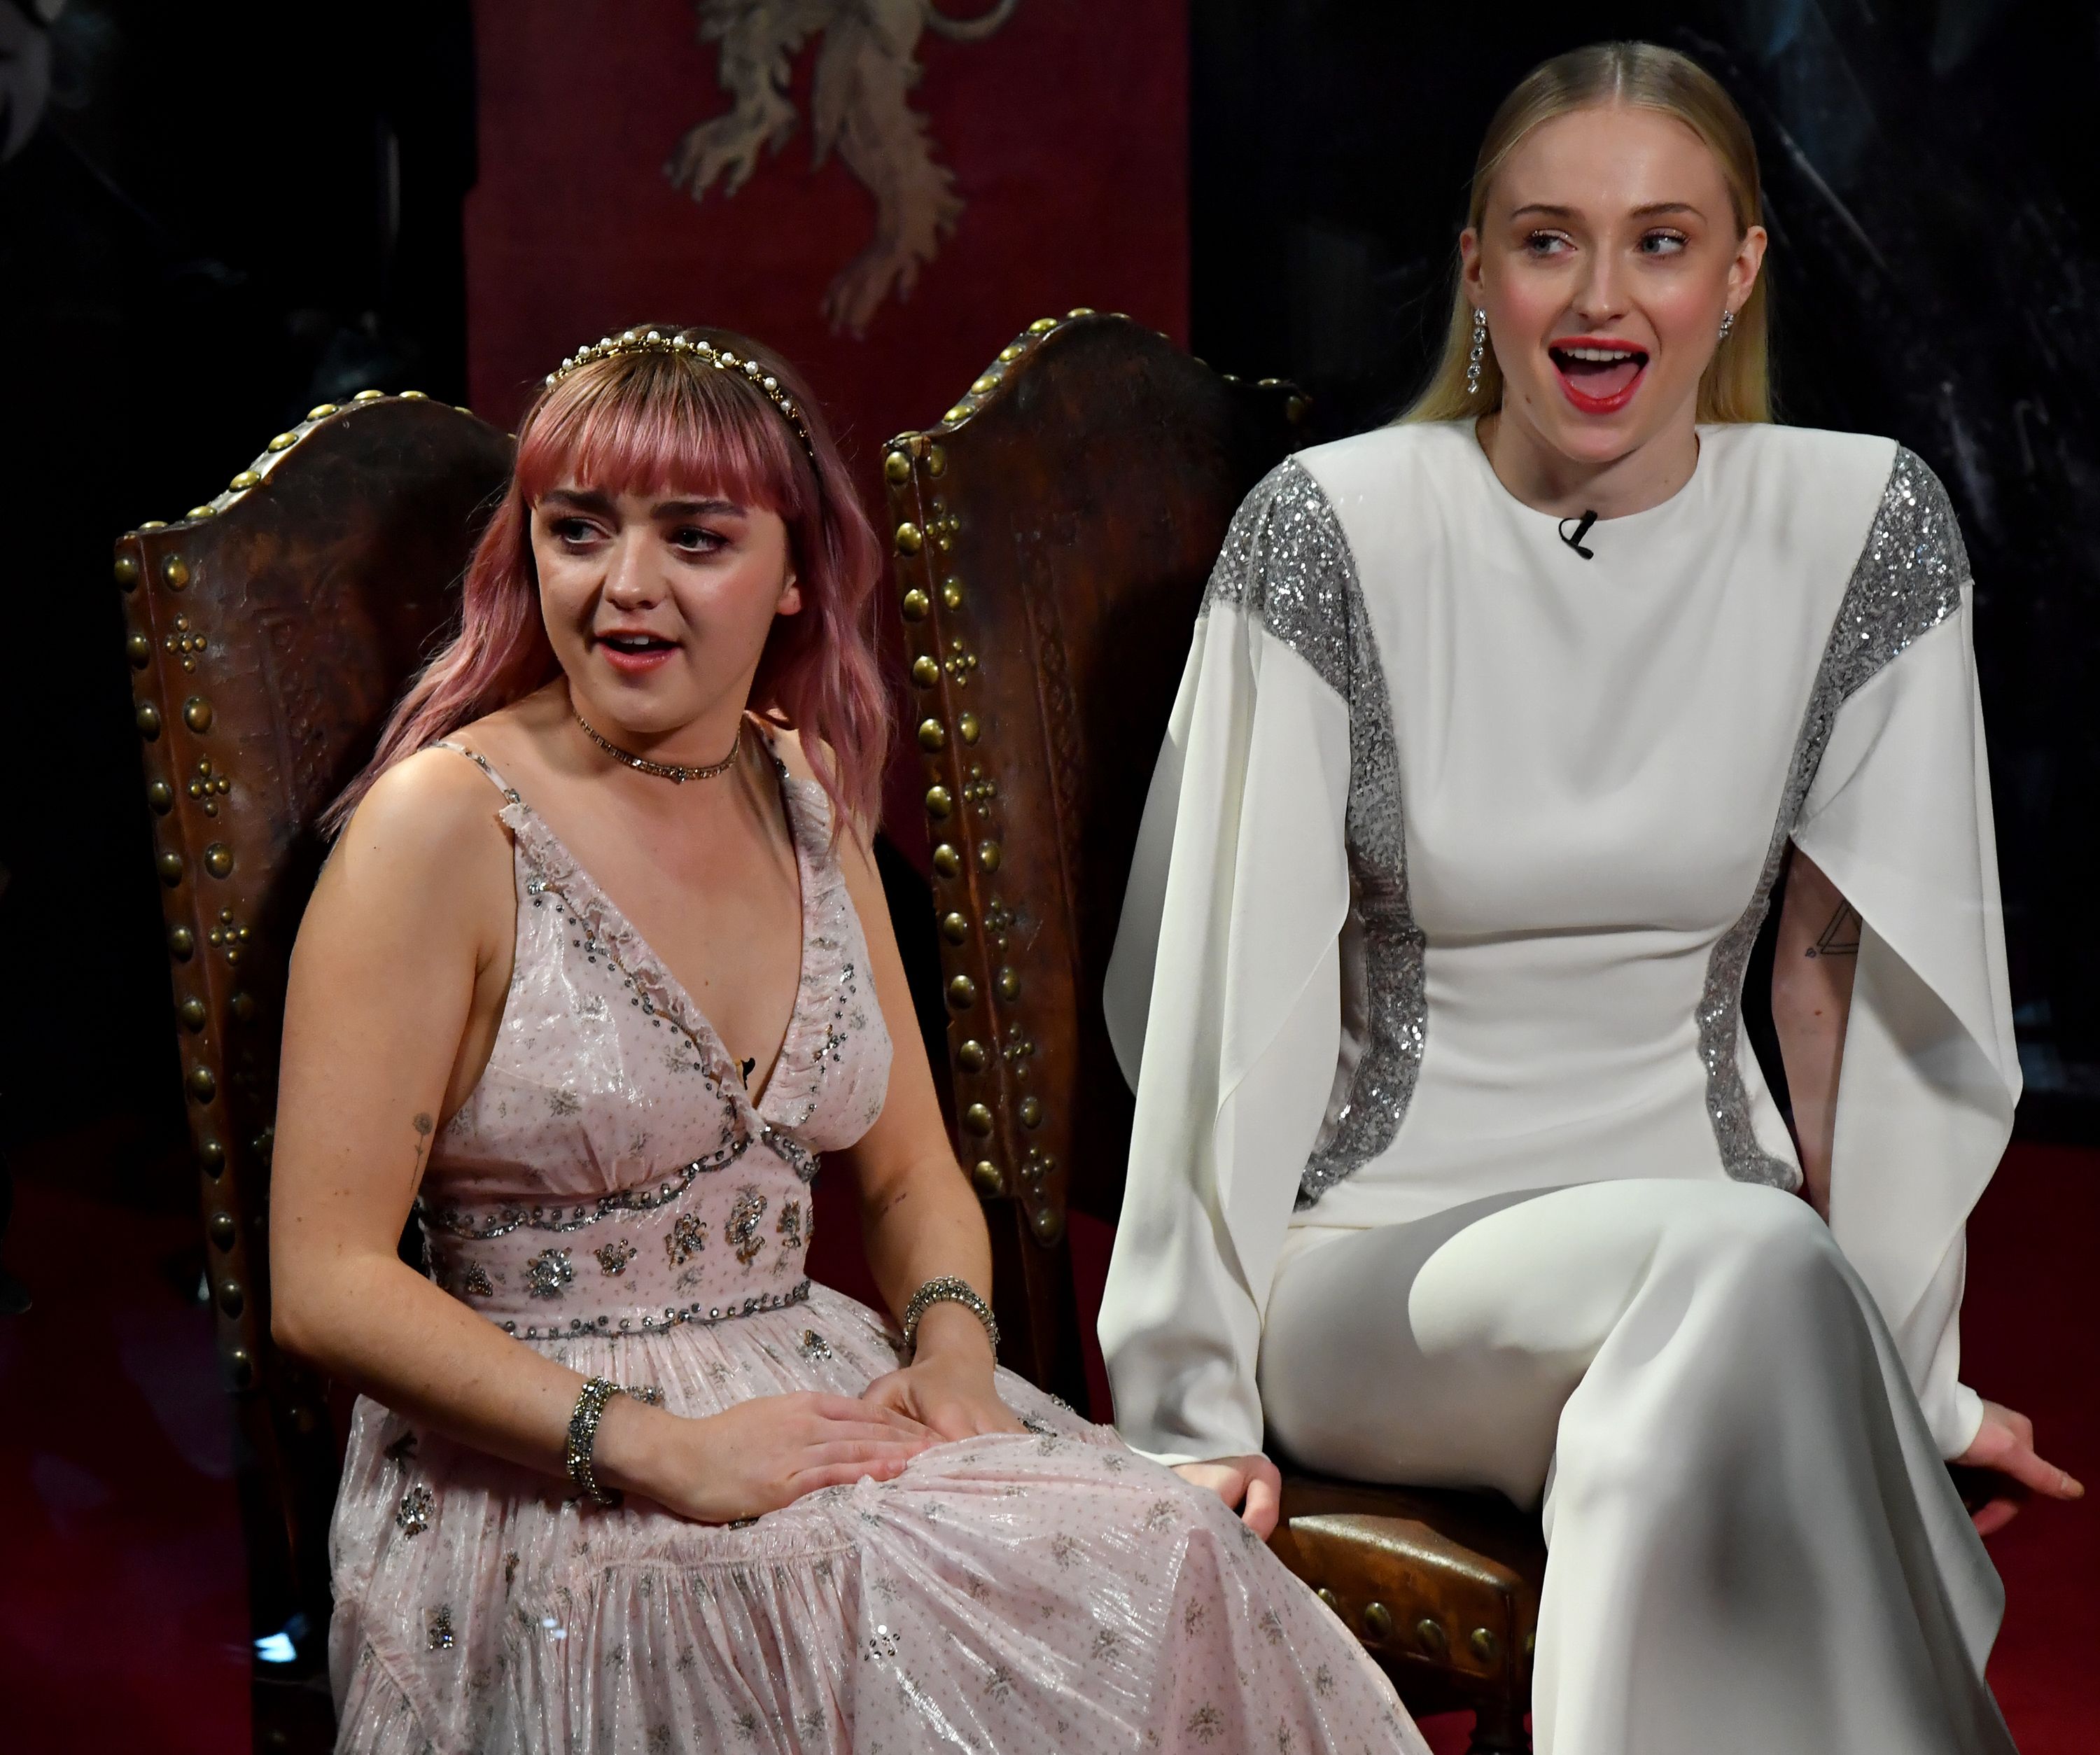 Sophie Turner And Maisie Williams Were Pranked By Game Of Thrones Creators